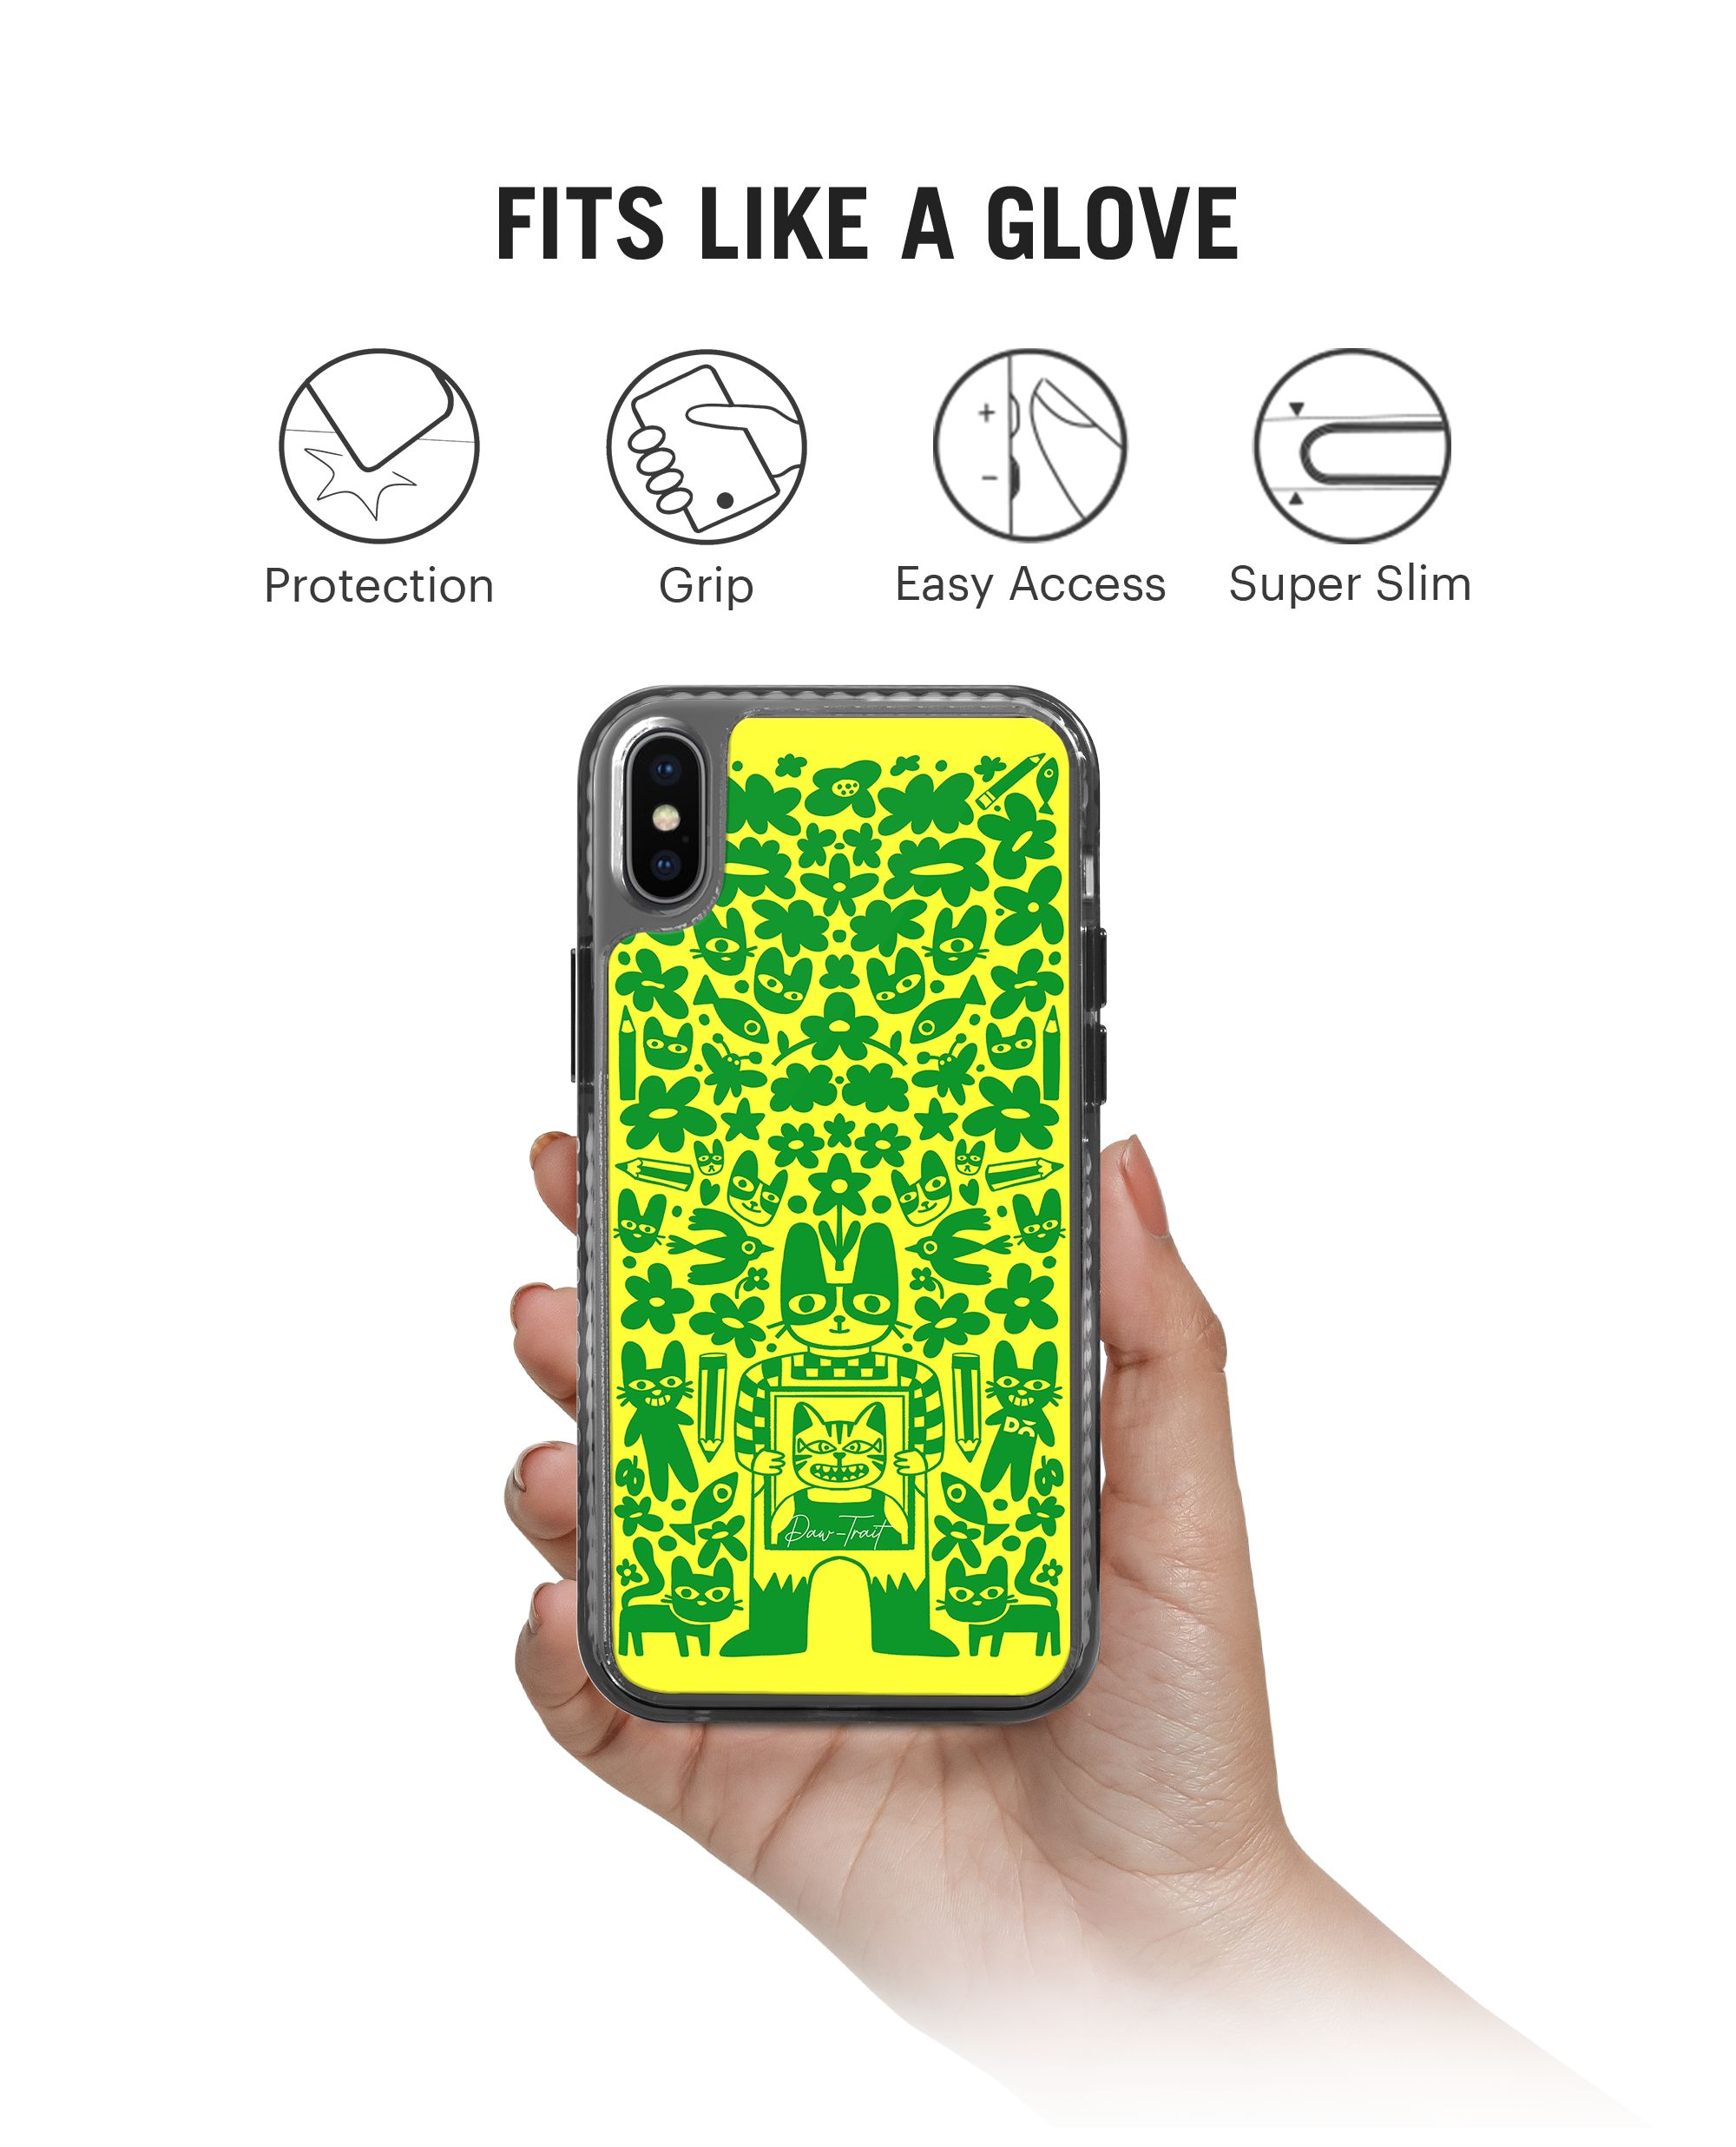 DailyObjects Mew Sketch Stride 20 Case Cover For iPhone X  Stride Green   Iphone X Covers  Cases Online in India